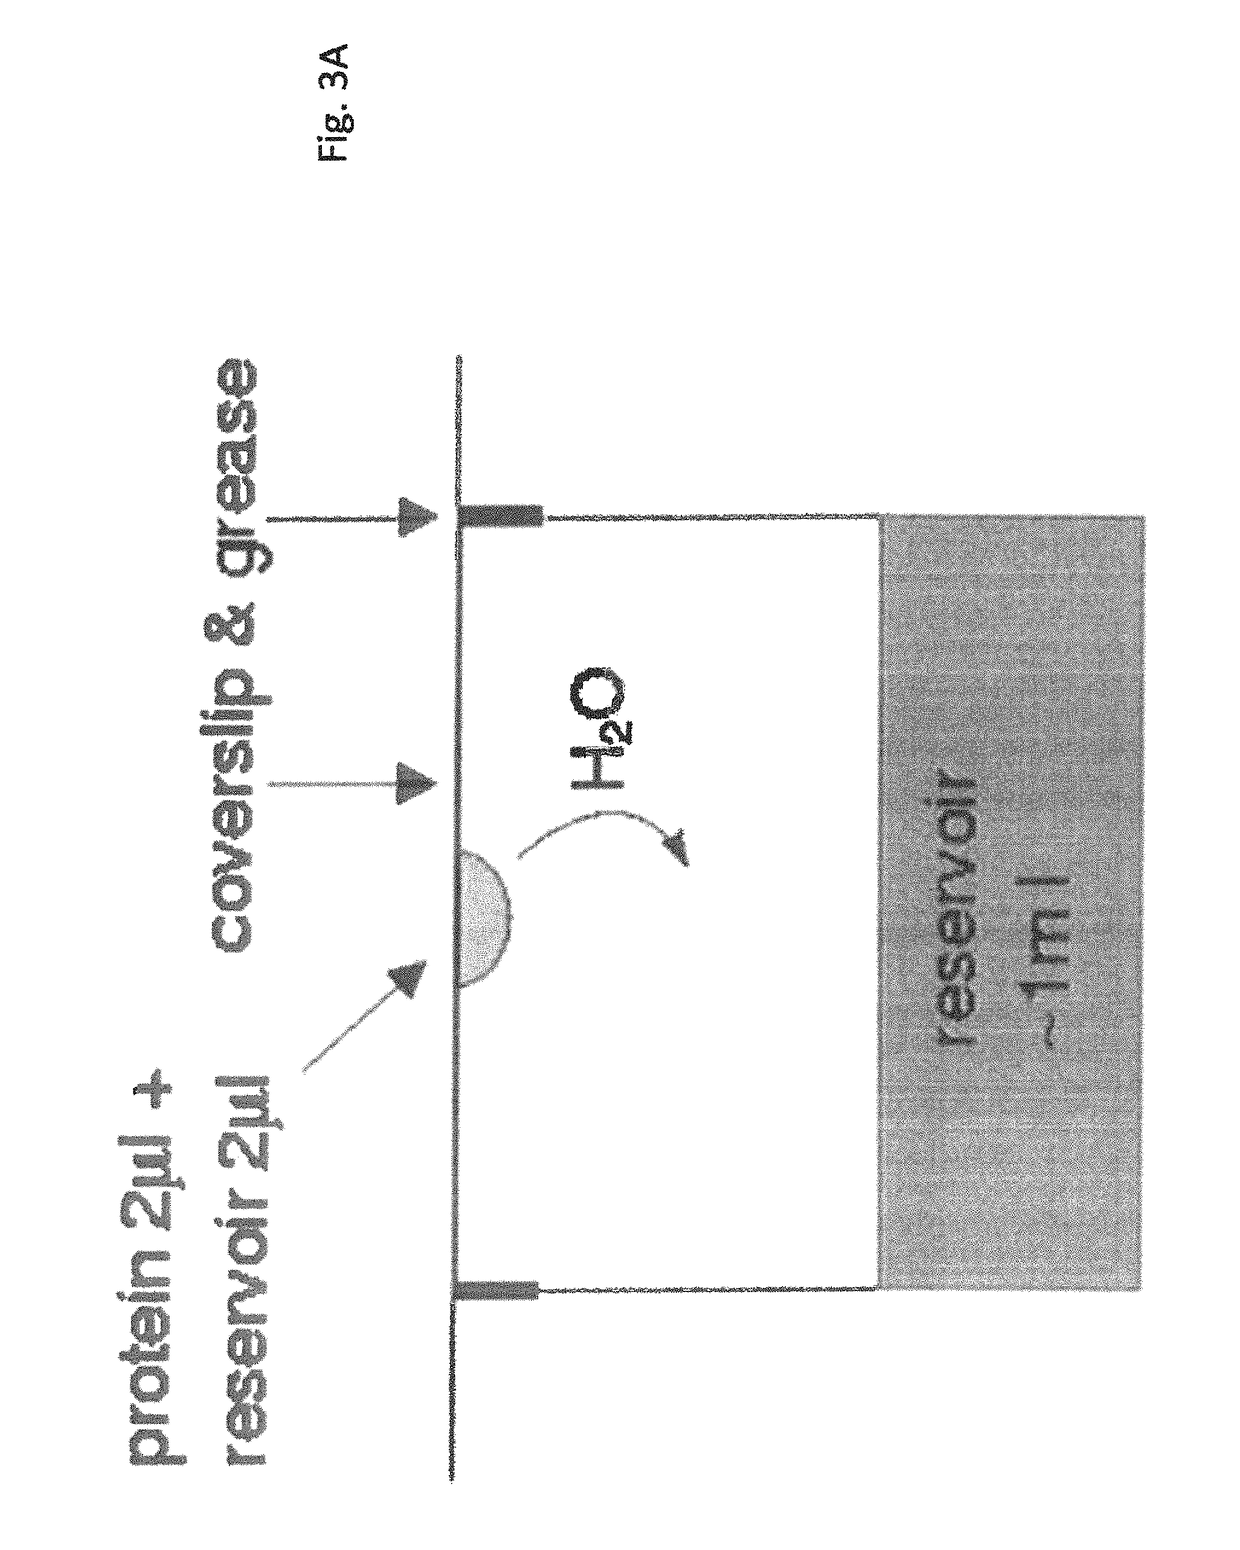 Method for preparing high quality crystals by directing ionized gas molecules through and/or over a saturated solution comprising a protein